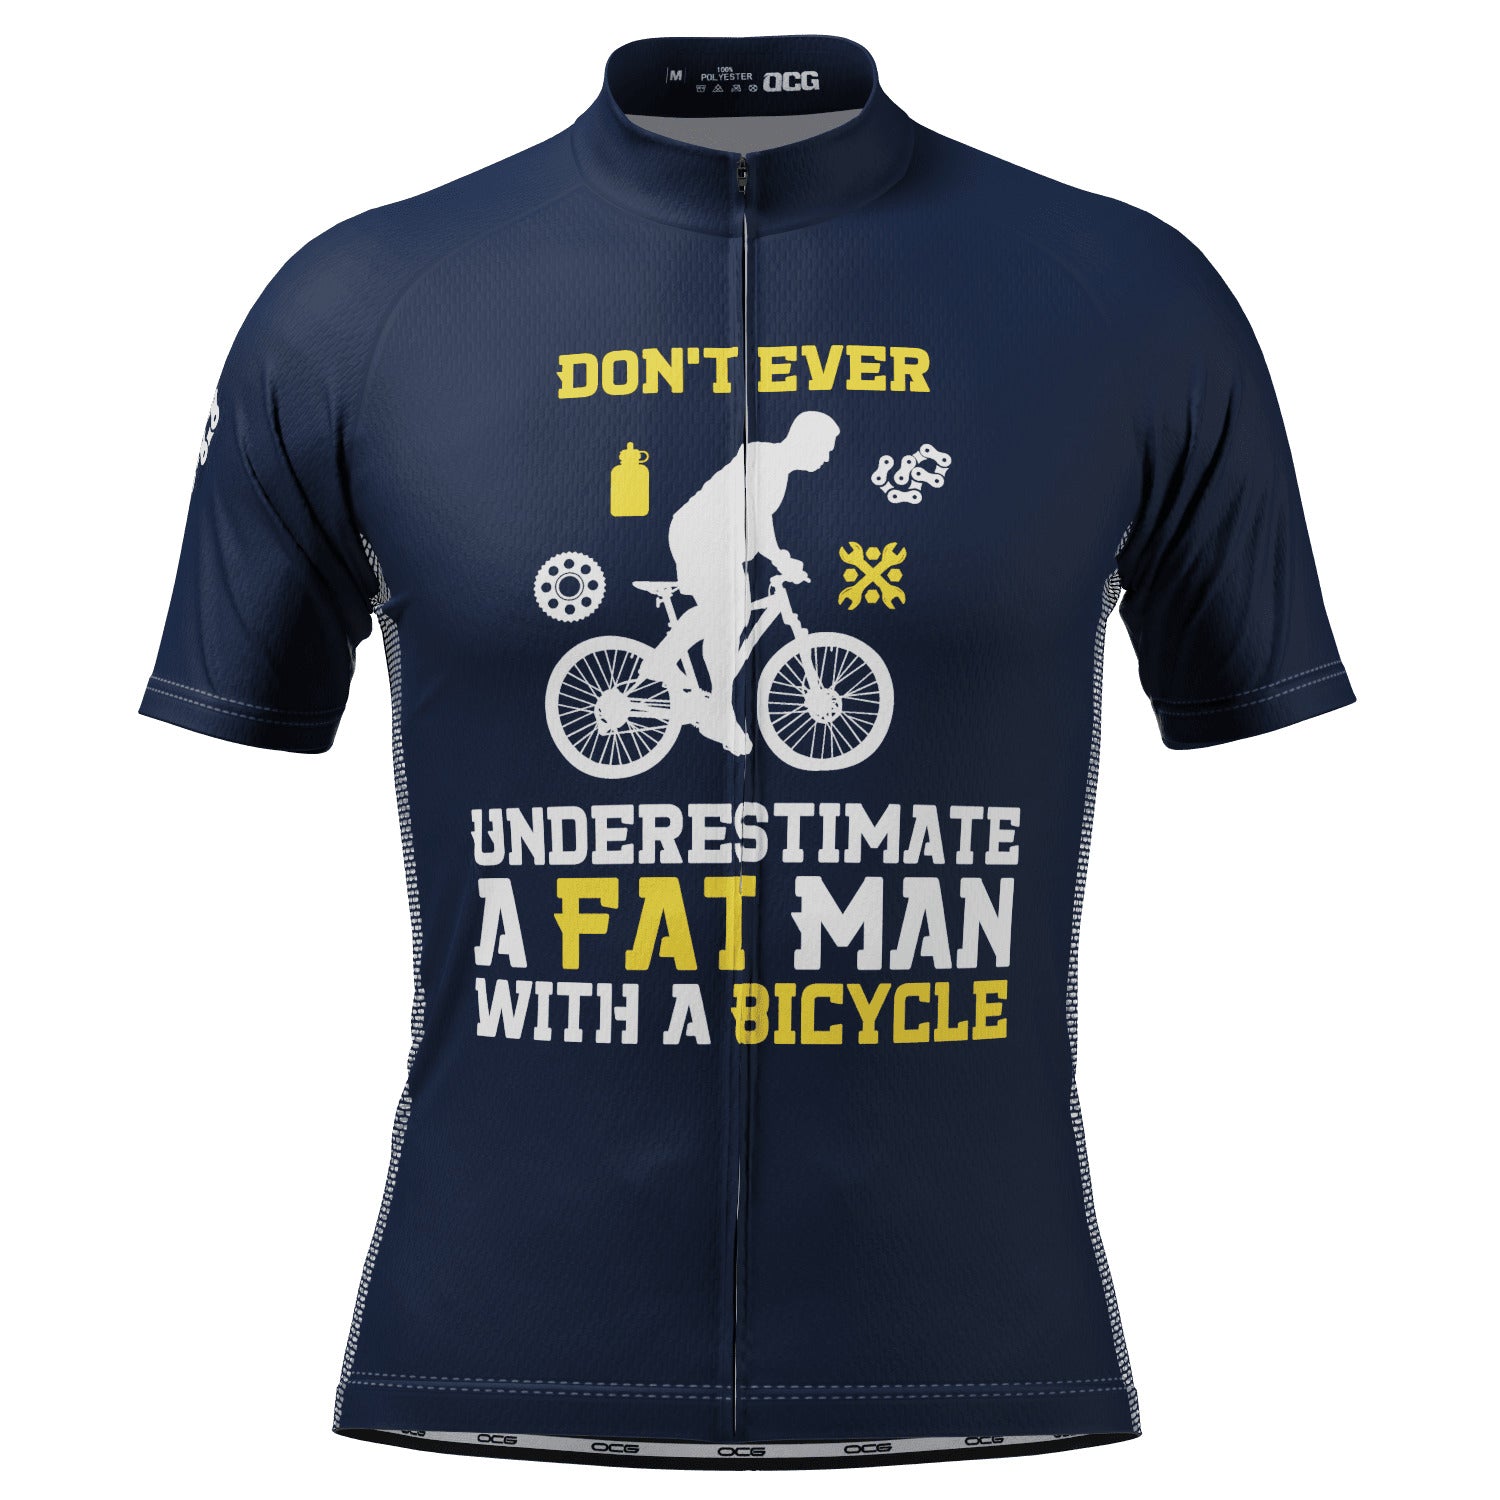 Men's Don't Ever Underestimate a Fat Man Short Sleeve Cycling Jersey